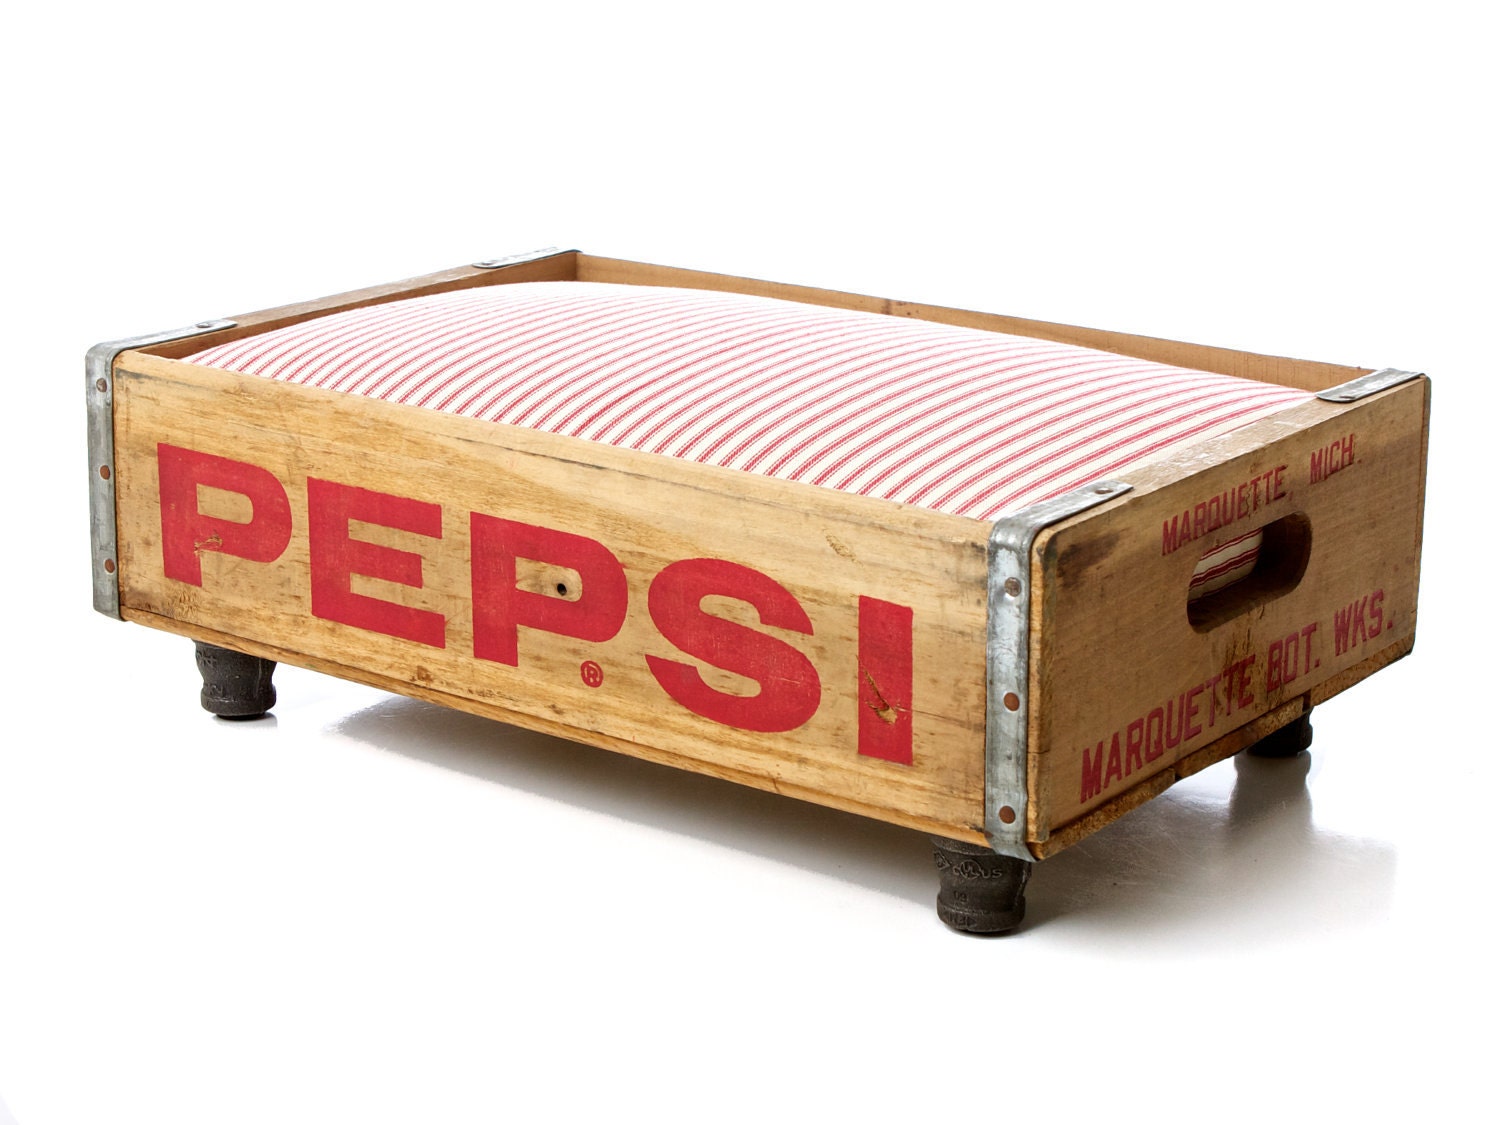 REVERSIBLE Pepsi Canada Dry Luxury Vintage Cat Dog Pet Bed, Upcycled Soda Crate, Rustic Industrial Chic, Red & White Stripe